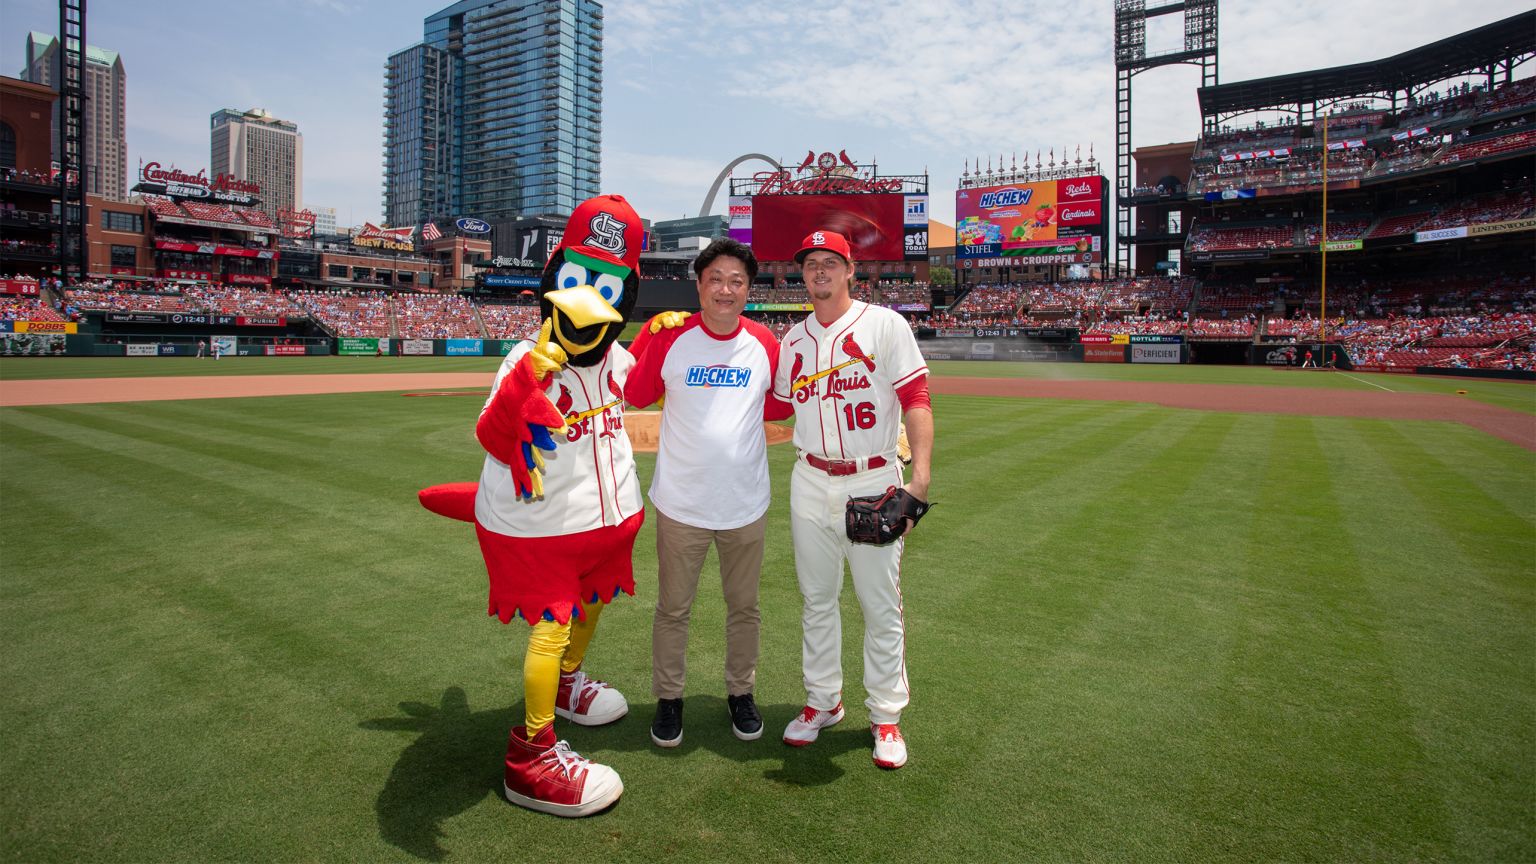 St. Louis Cardinals: Celebrating recognition of the St. Louis Stars